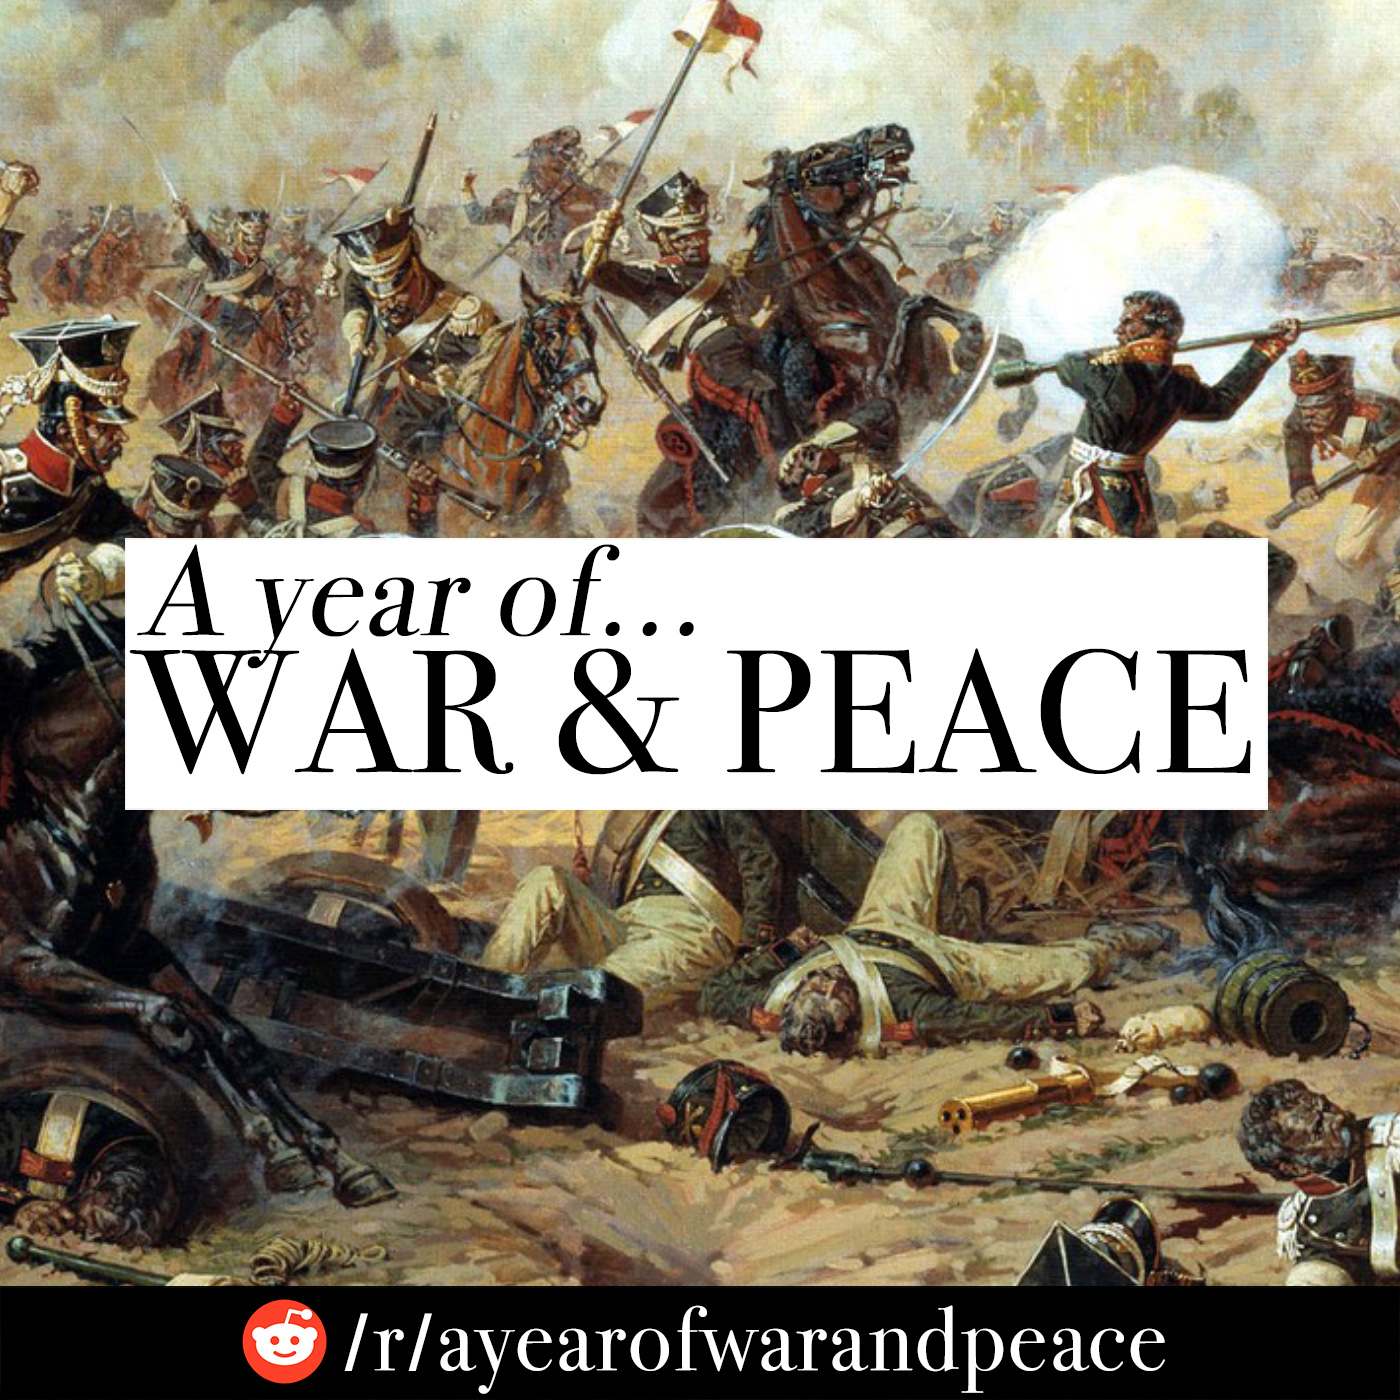 097 - Book 5, Chapter 13. War & Peace Audiobook and Discussion